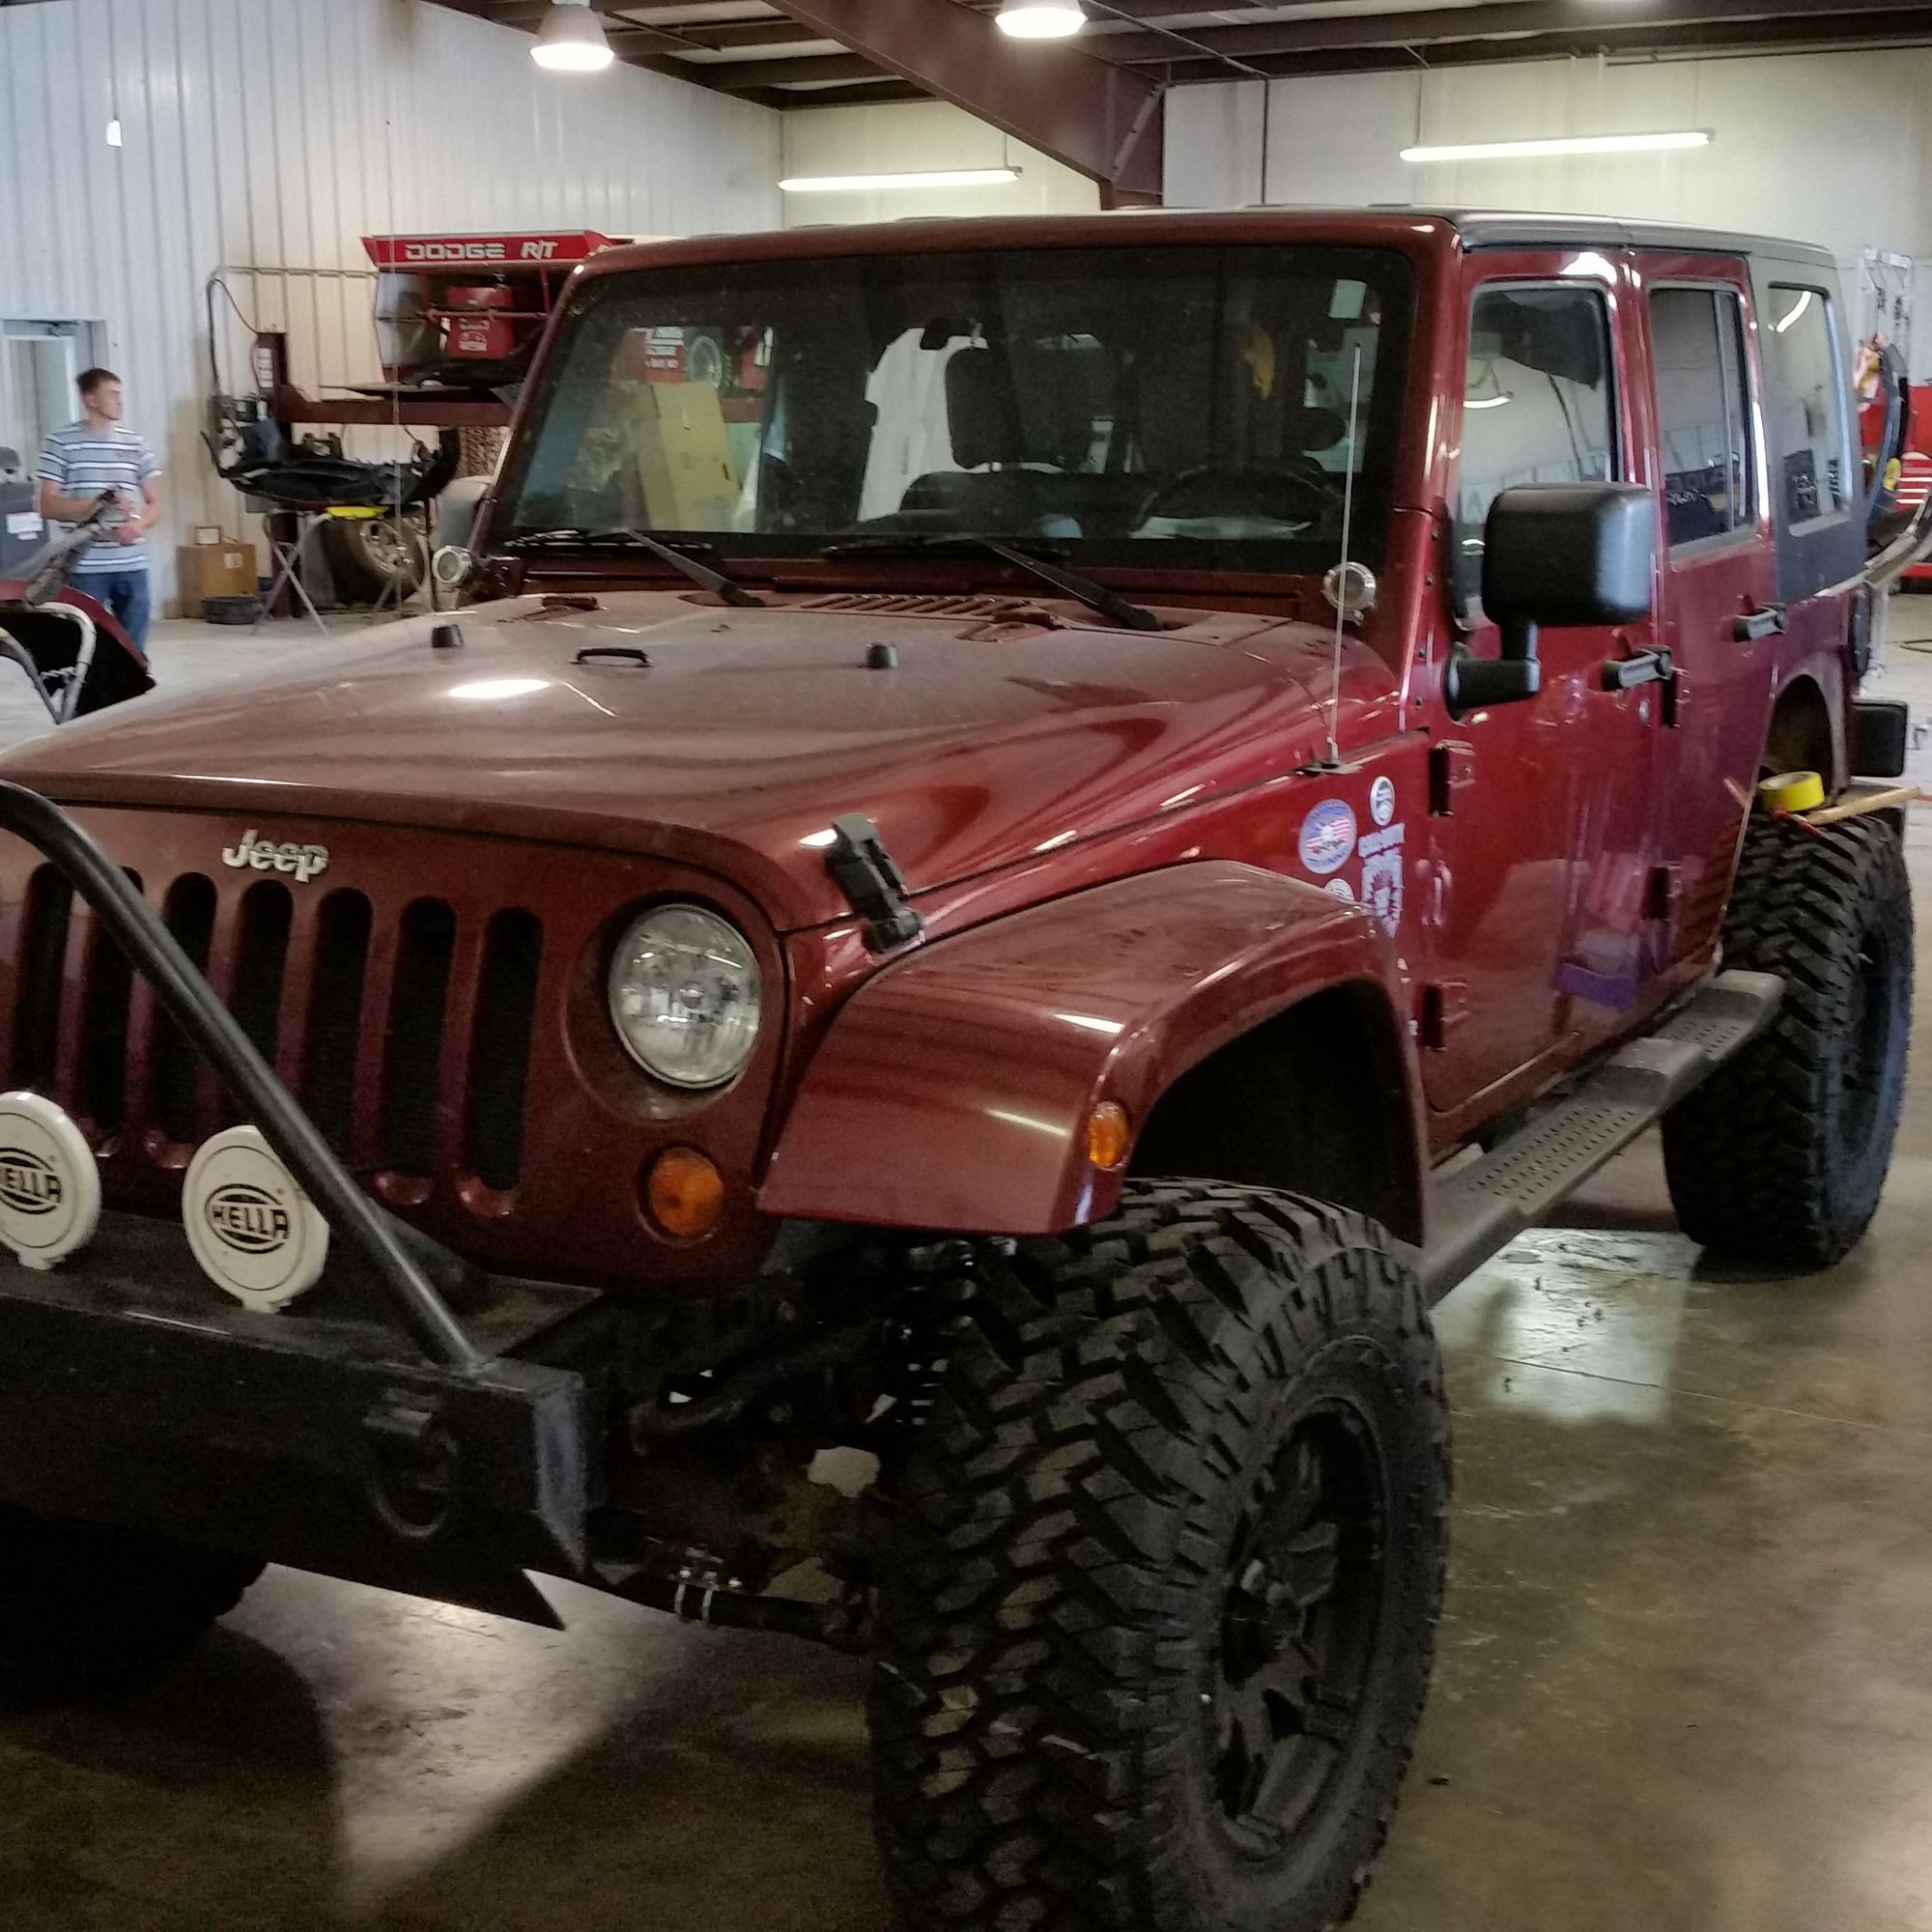 Clock Spring Re-call - Now Electrical Problems (Maybe Dealer Caused?)   - The top destination for Jeep JK and JL Wrangler news, rumors, and  discussion